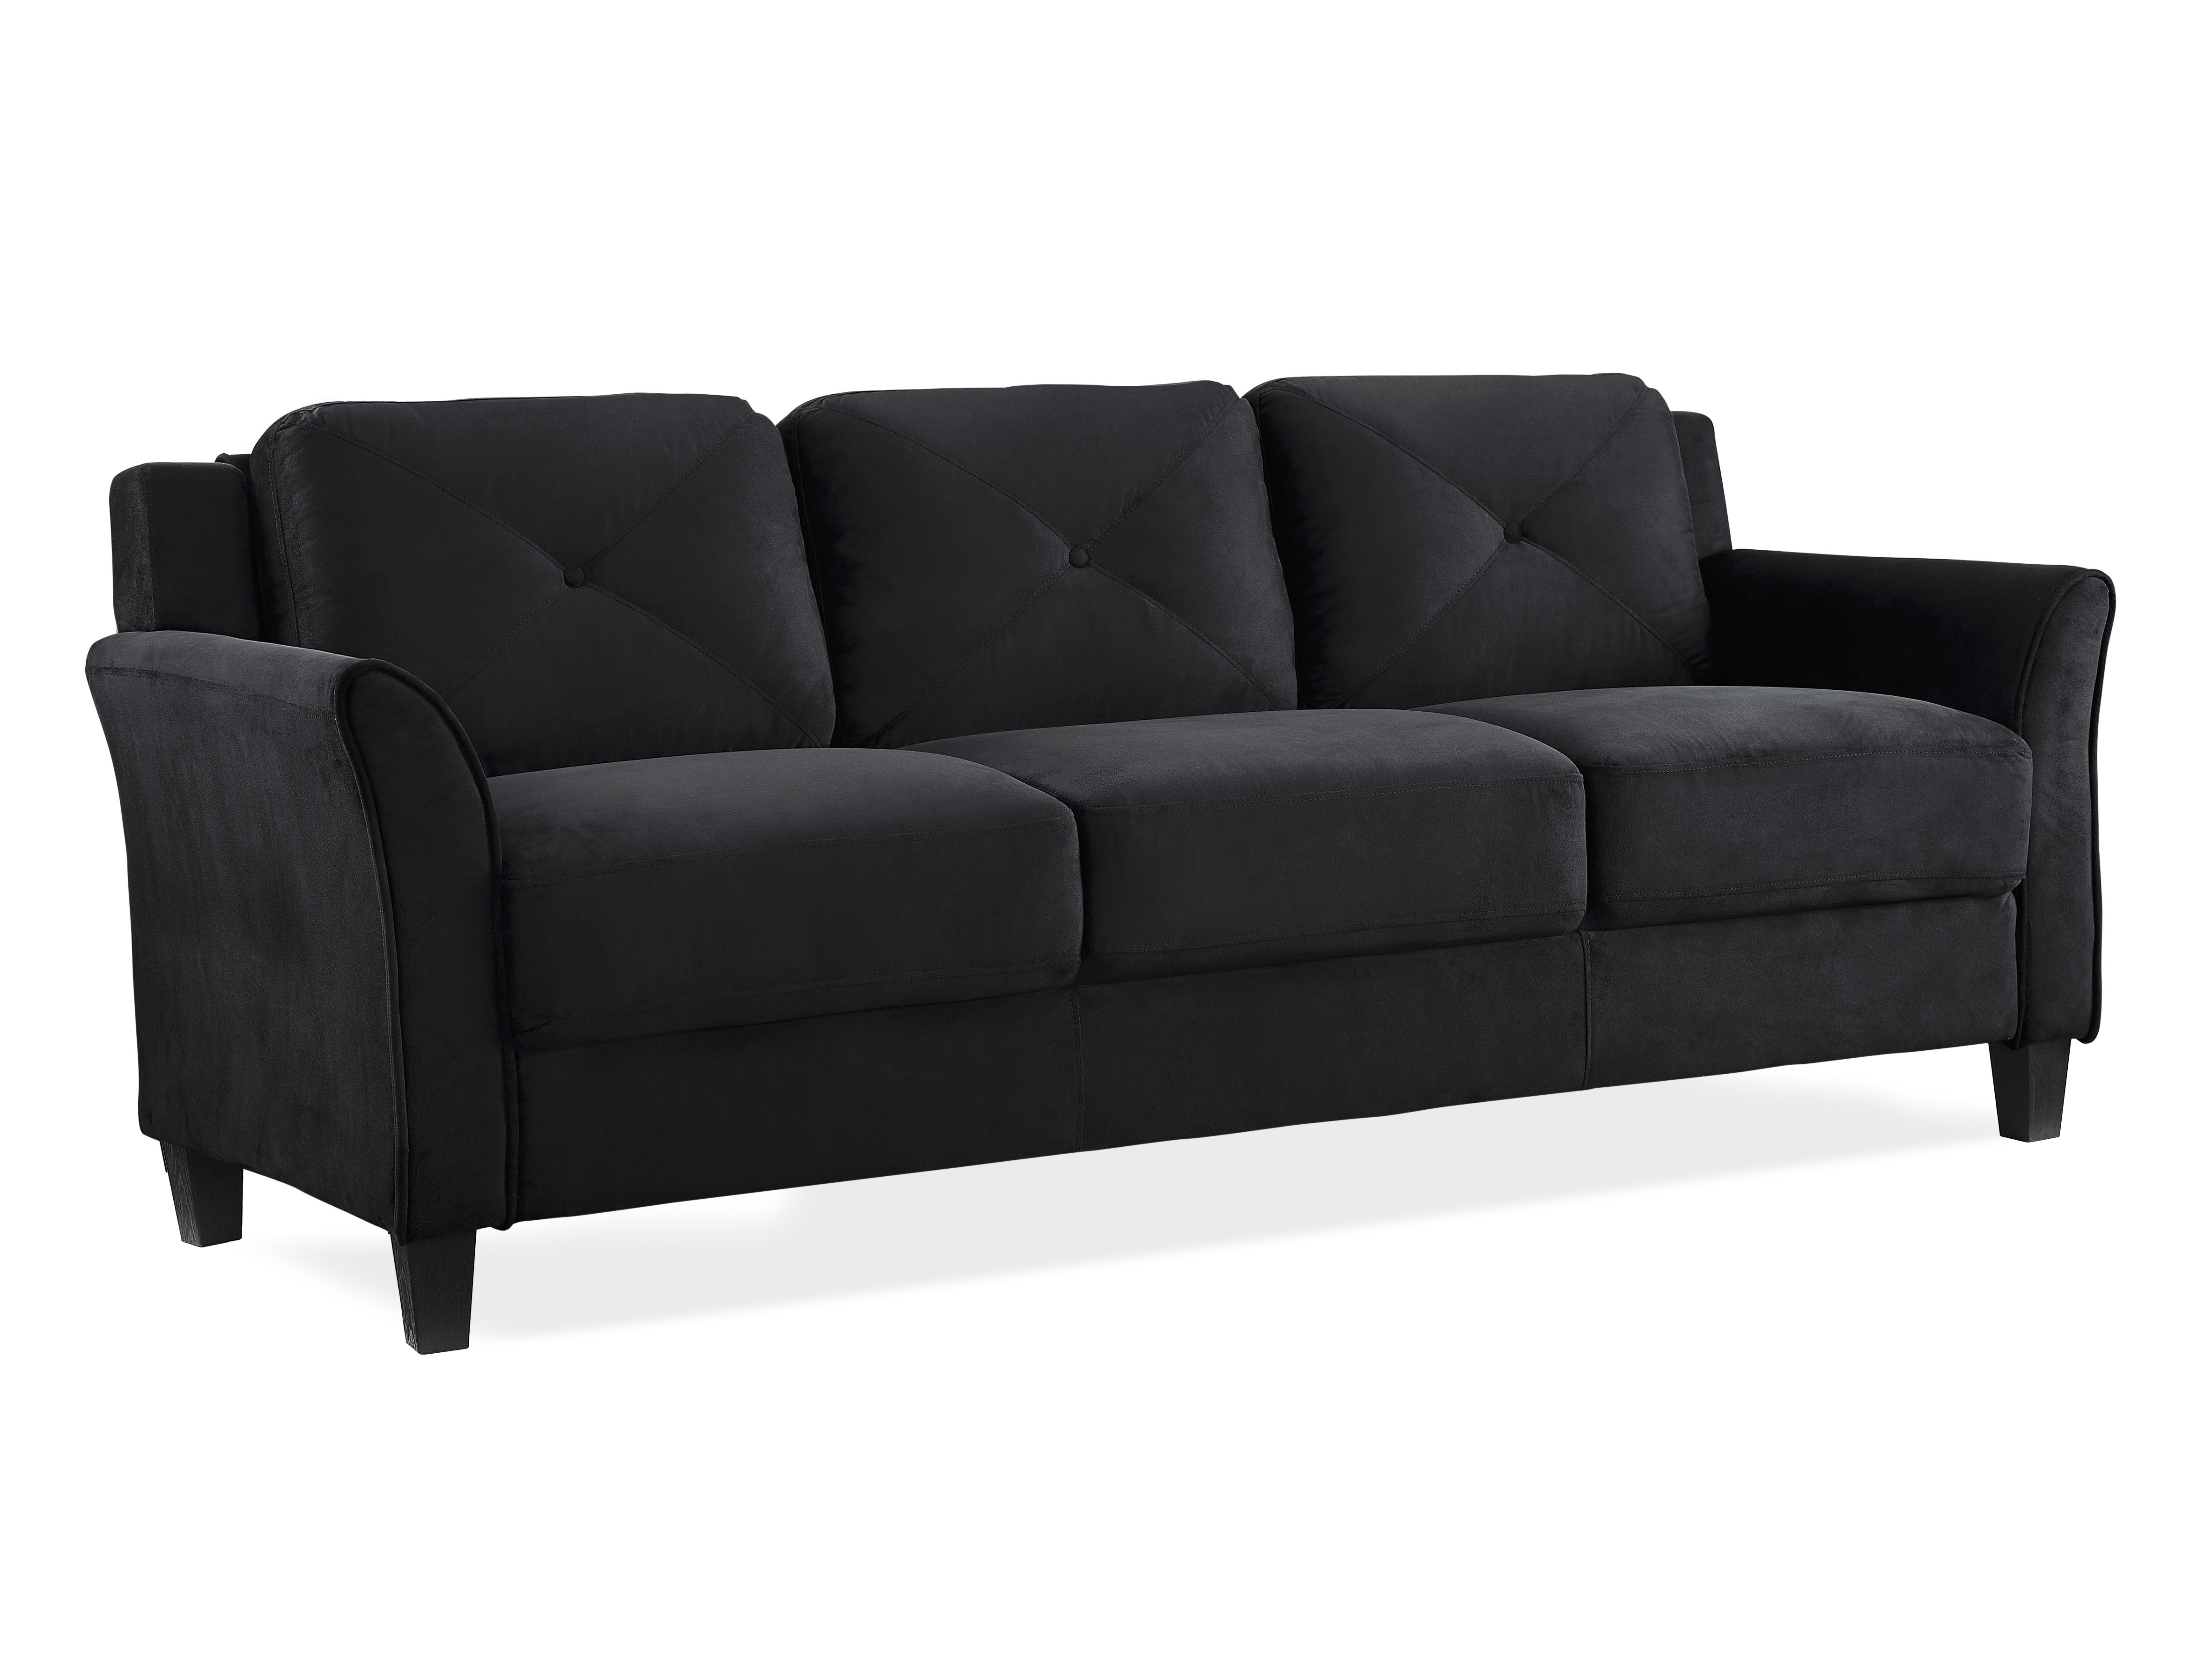 Lifestyle Solutions Taryn Curved Arms Sofa, Black Fabric - image 1 of 18